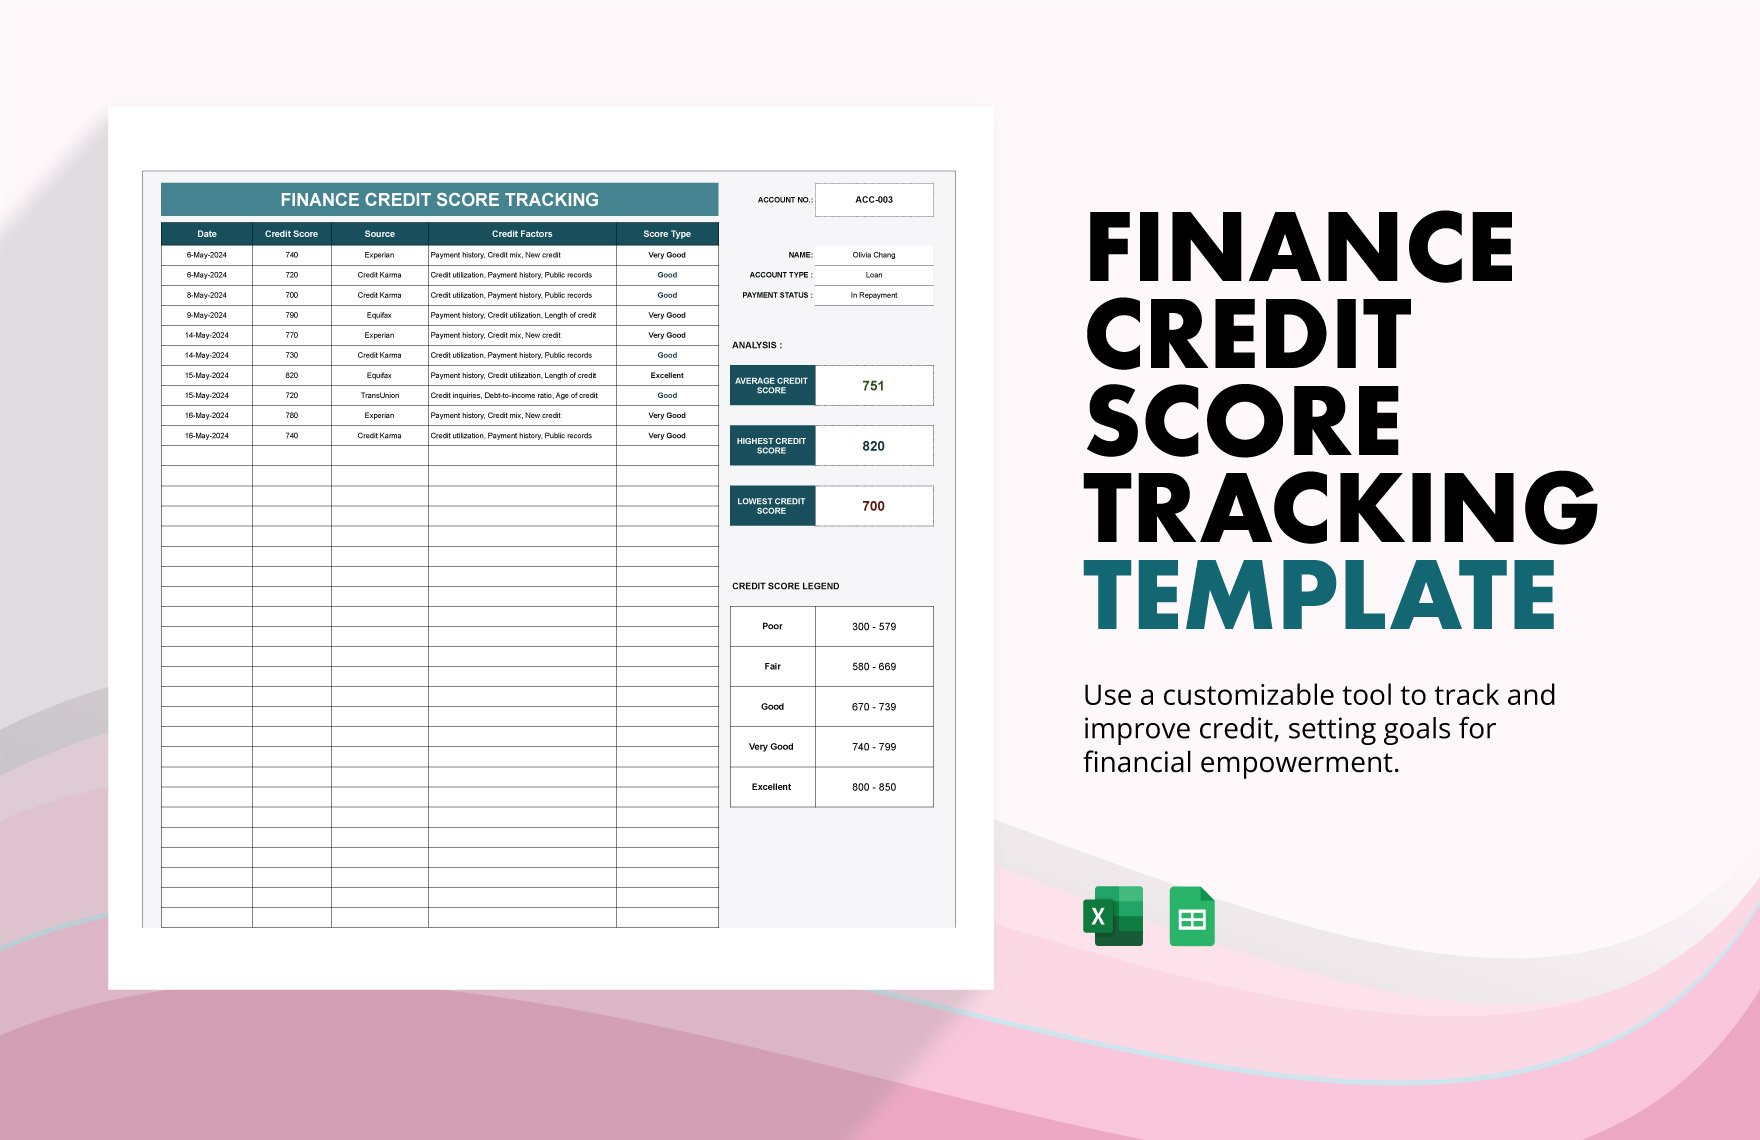 Finance Credit Score Tracking Template